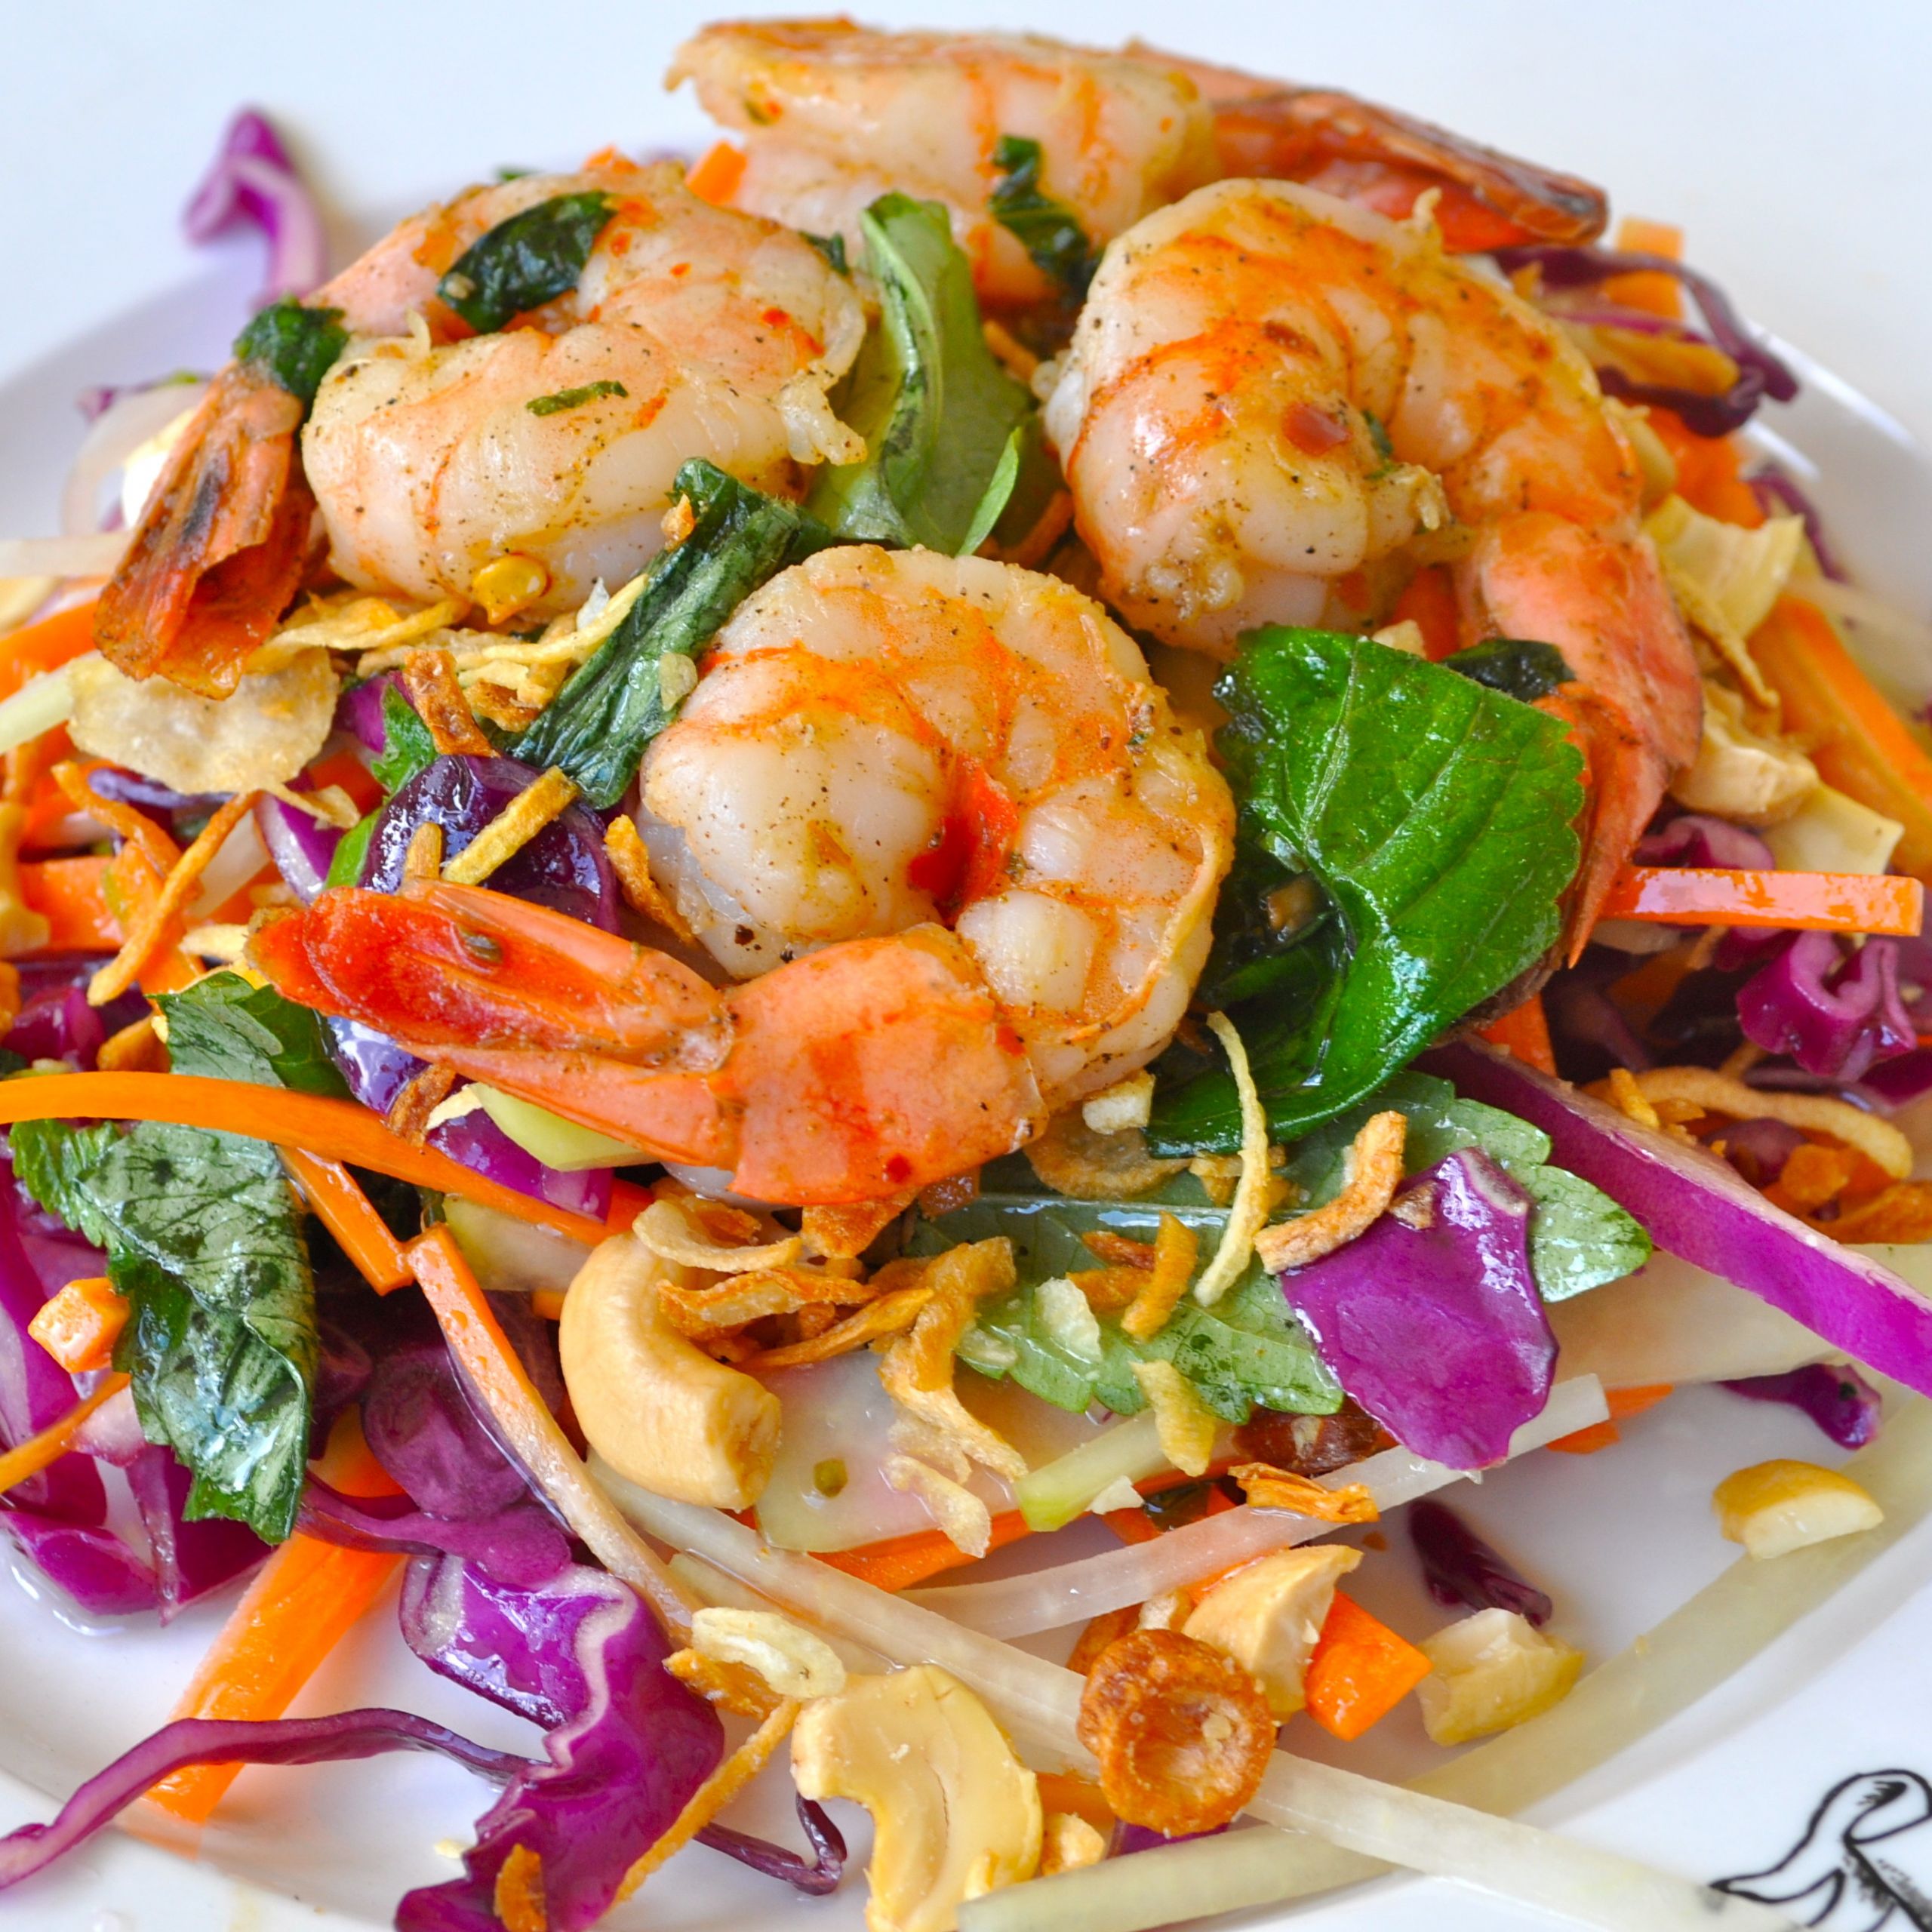 Grilled Shrimp Salad Recipes
 “You Will Want this Everyday” Vietnamese Grilled Shrimp